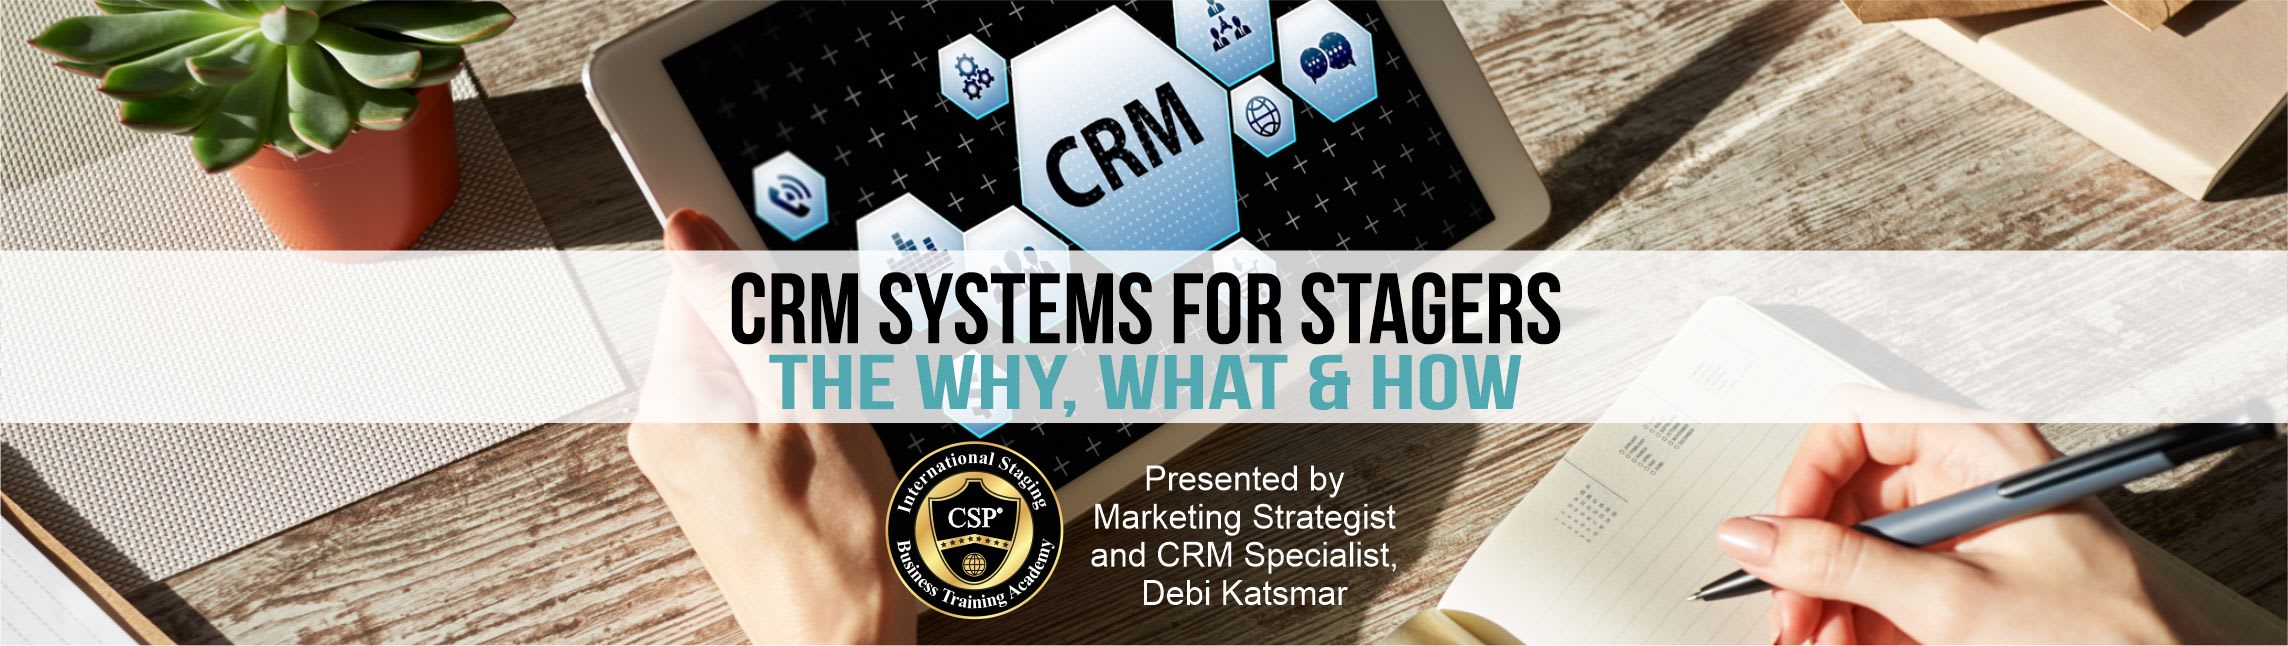 crm systems for stagers